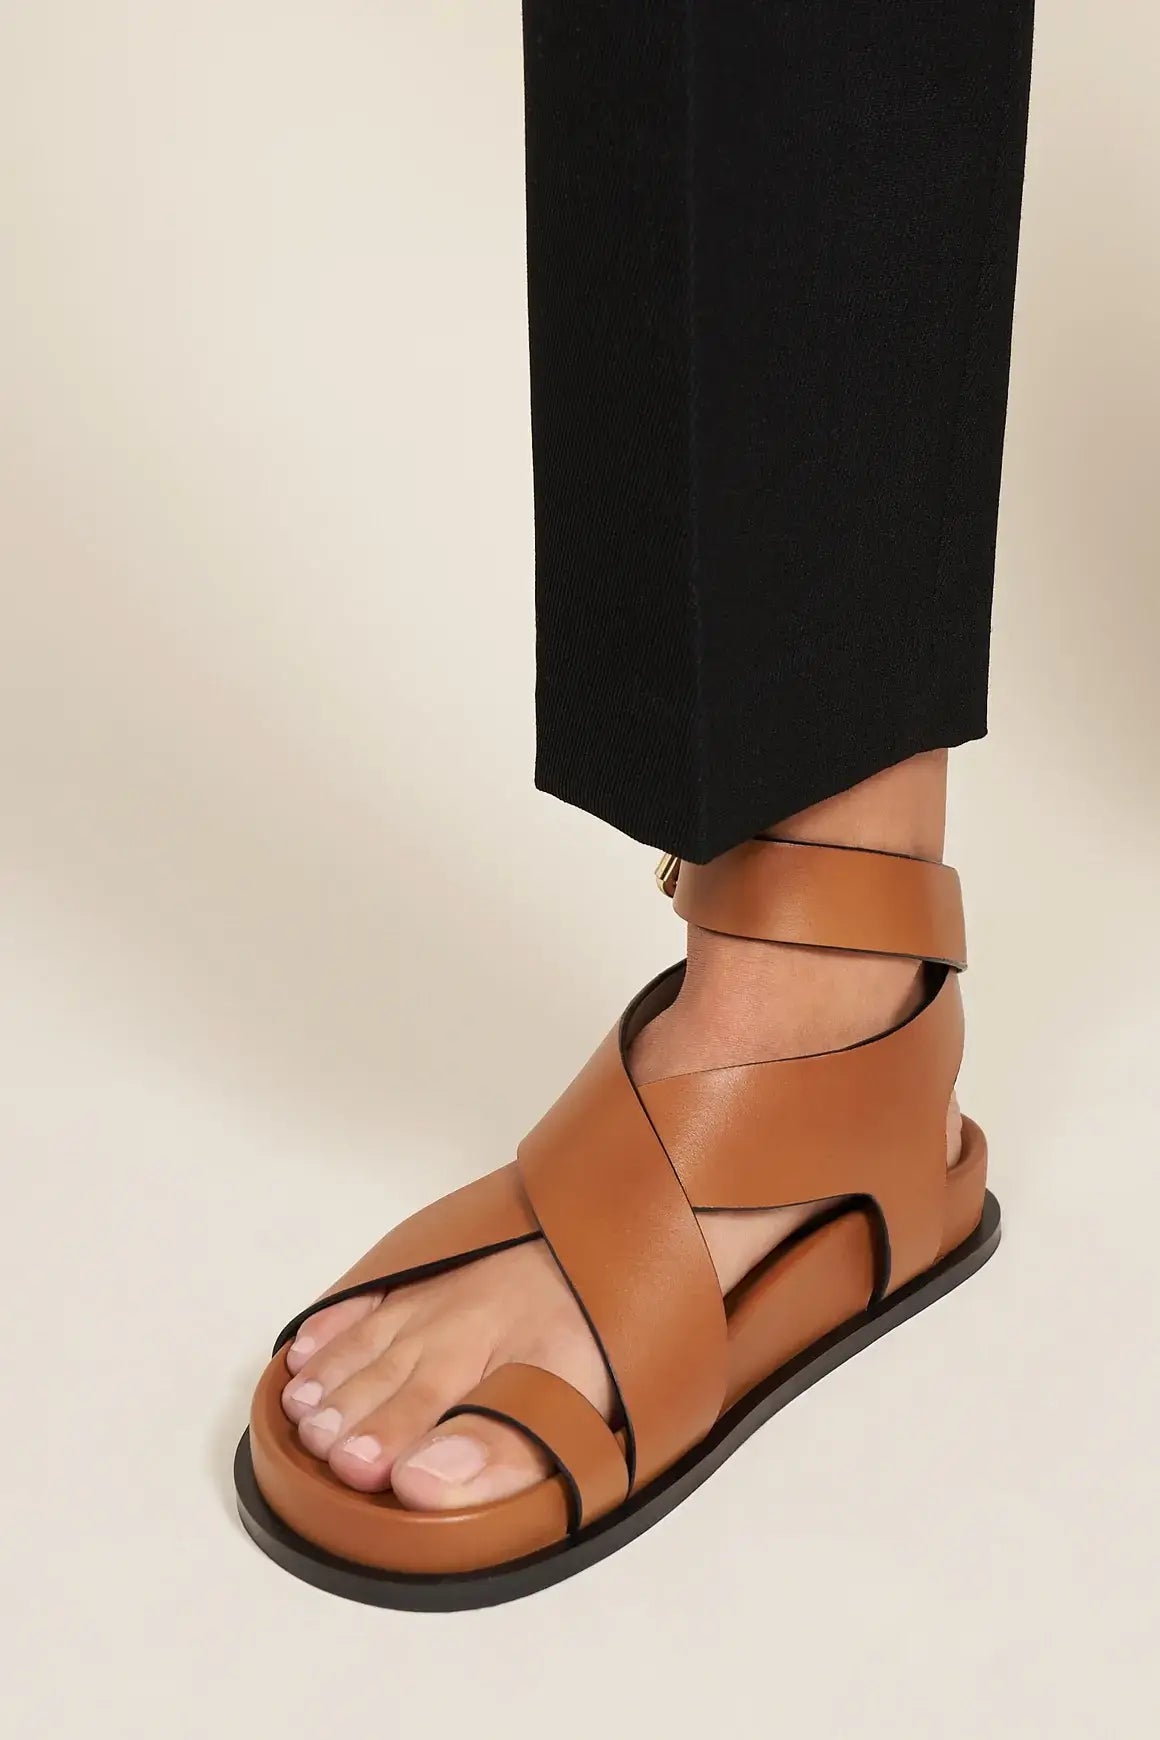 A.Emery | Jalen Sandal in Deep Tan The New Trend